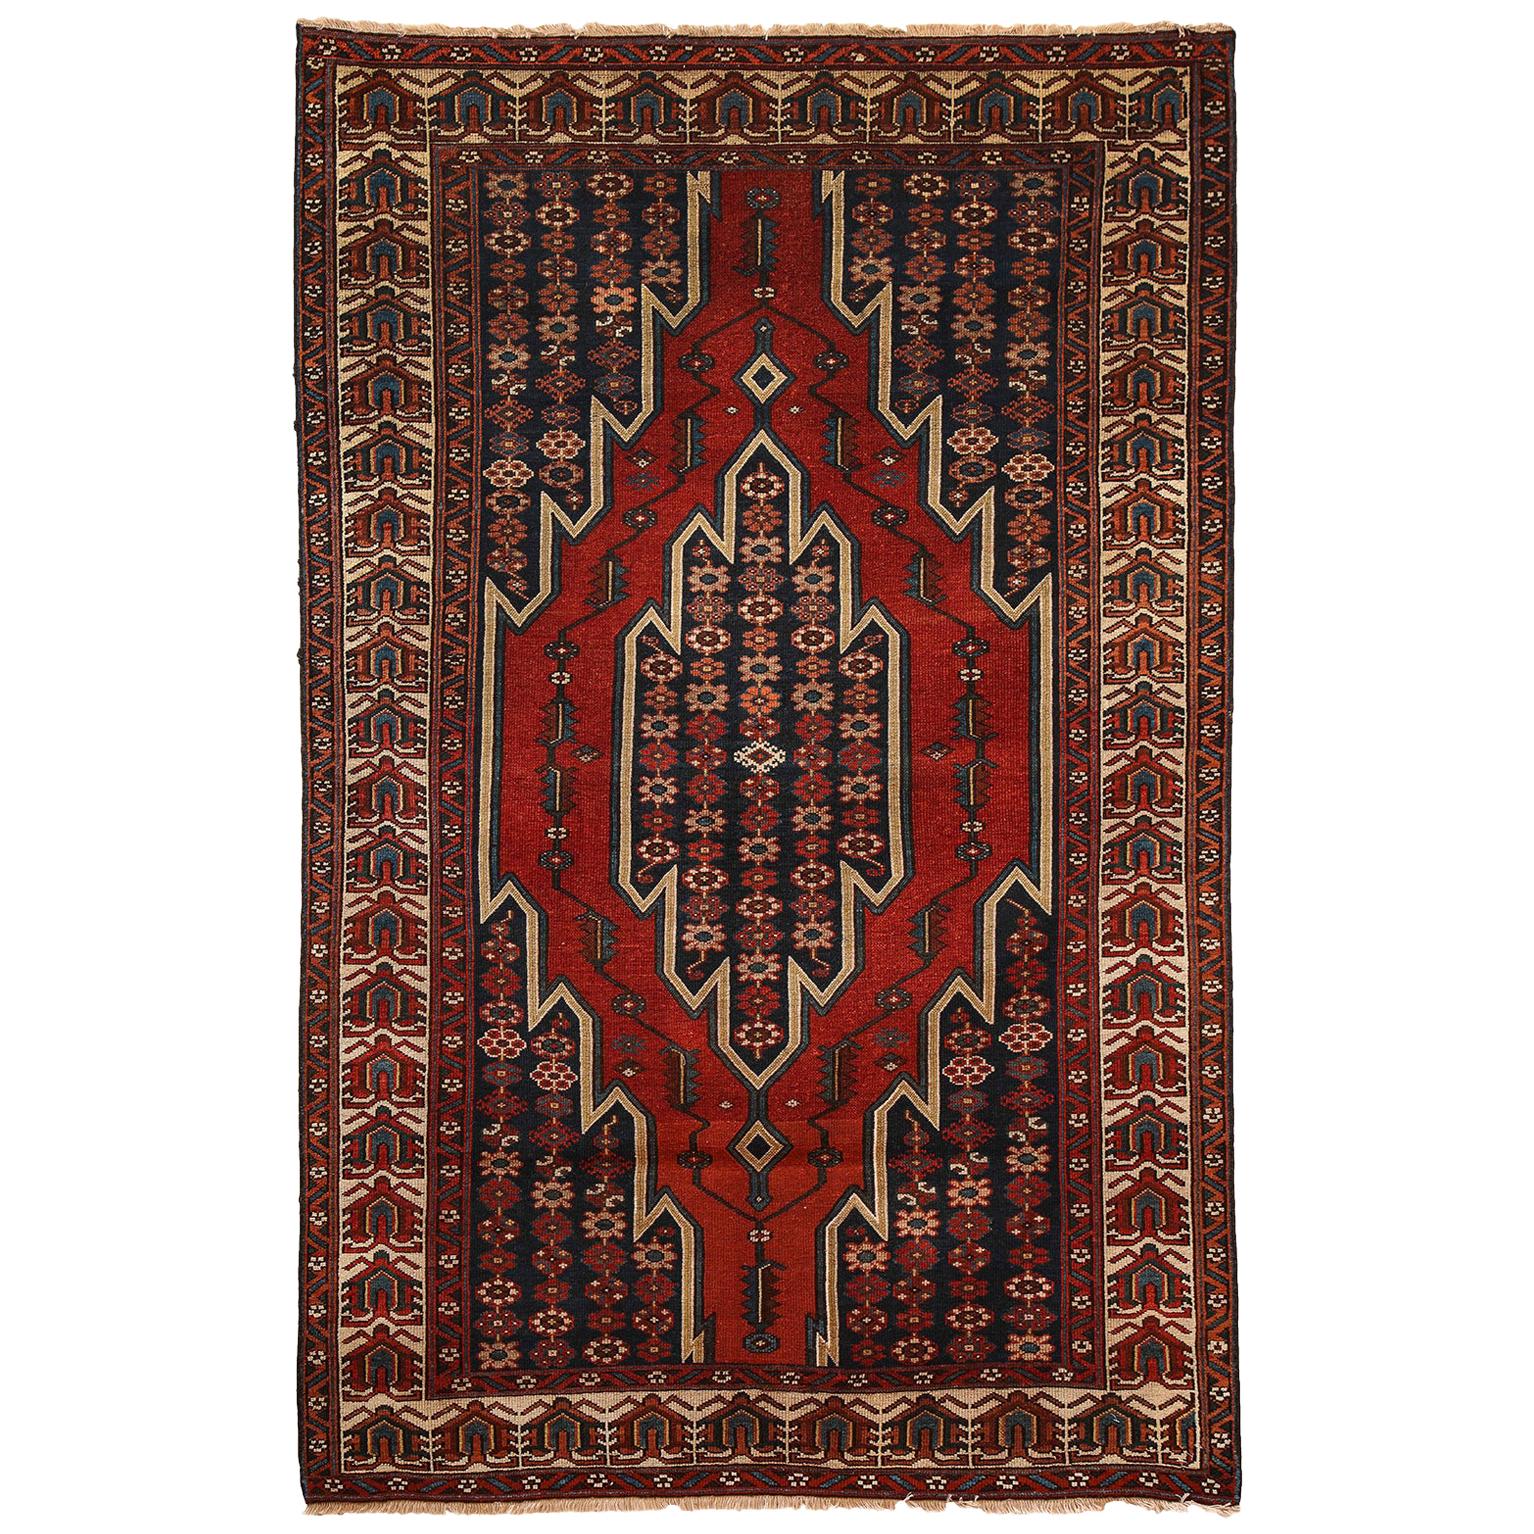 Antique 1920s Wool Persian Mazlaghan Rug, 4' x 6' For Sale